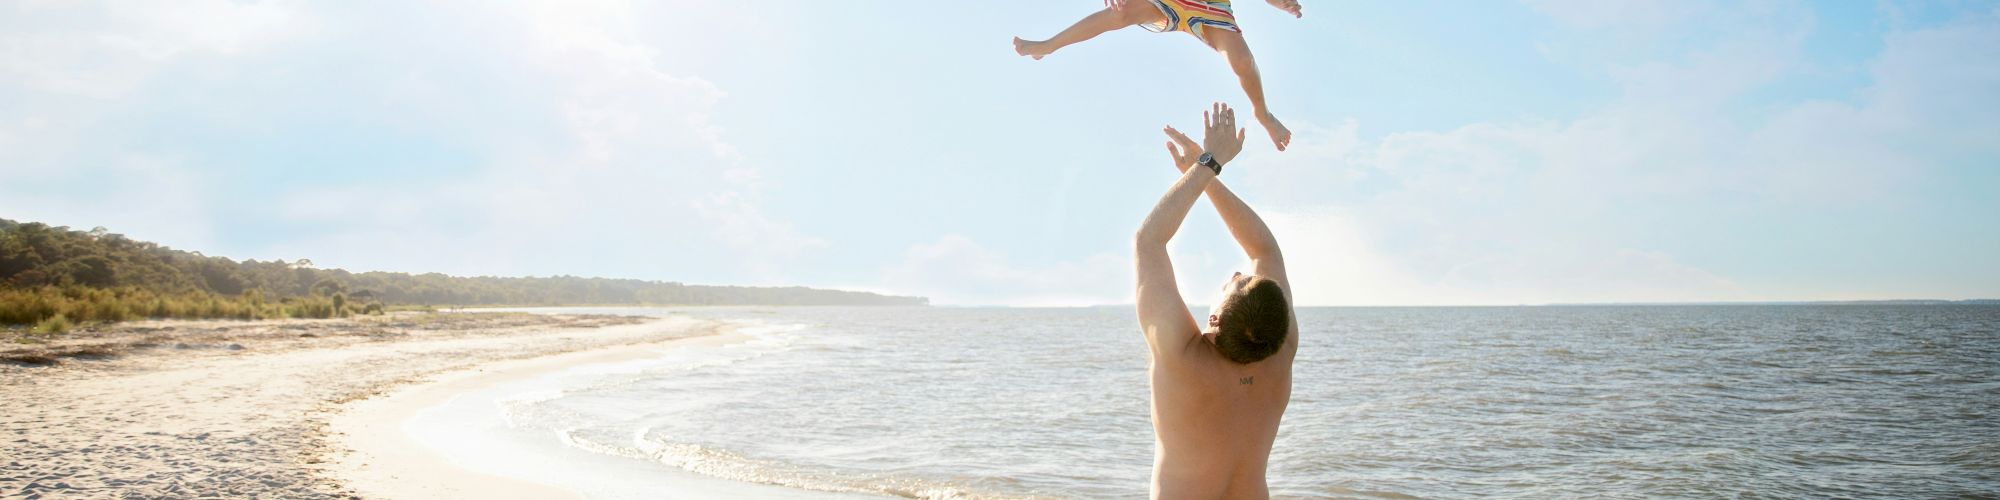 An adult is playing with a child by tossing them into the air on a sunny beach, with the ocean and shoreline in the background.